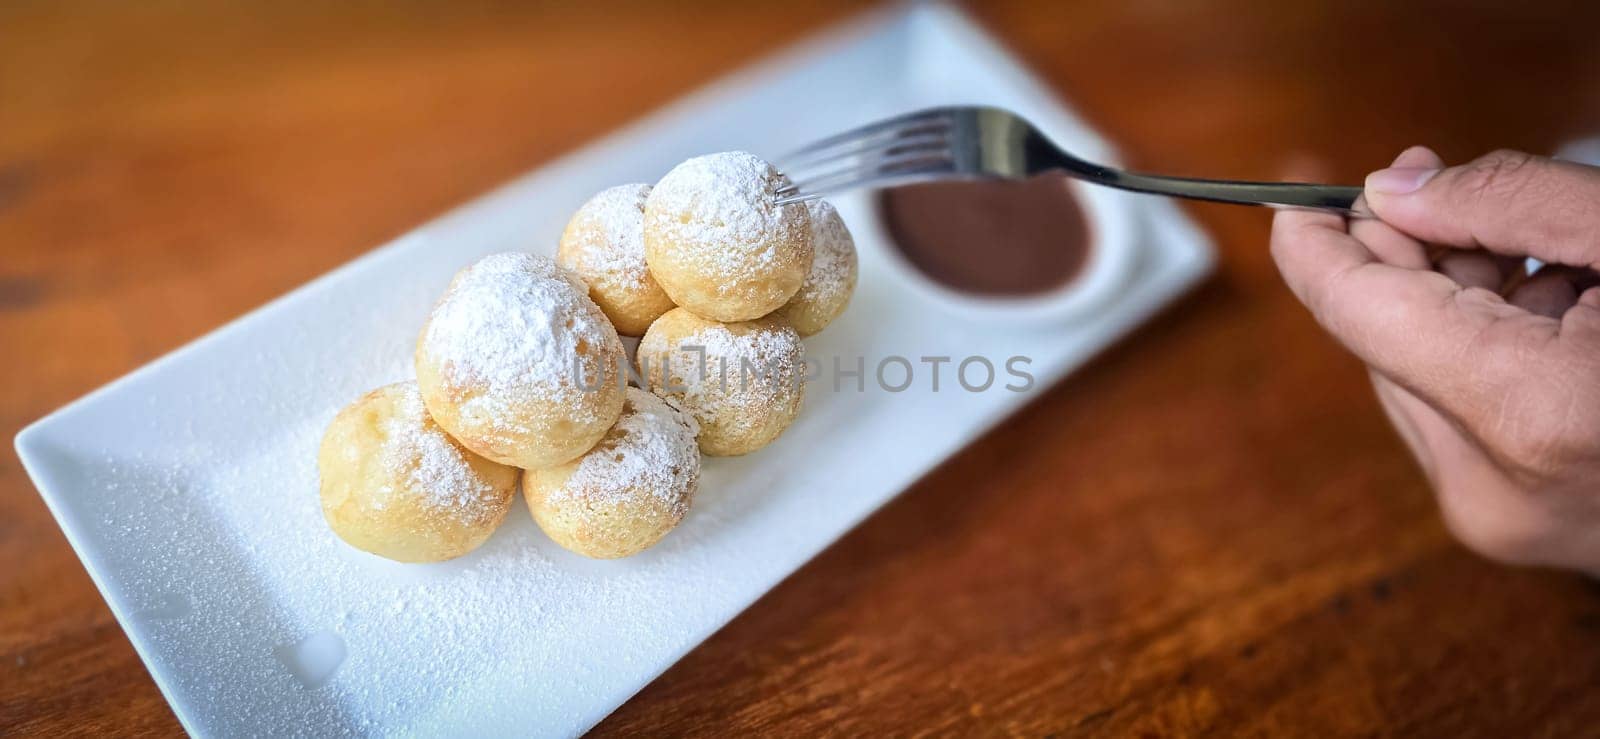 Homemade Dutch poffertjes mini pancakes with icing powdered sugar and chocolate fillings with additional chocolate sauce for delicious desserts